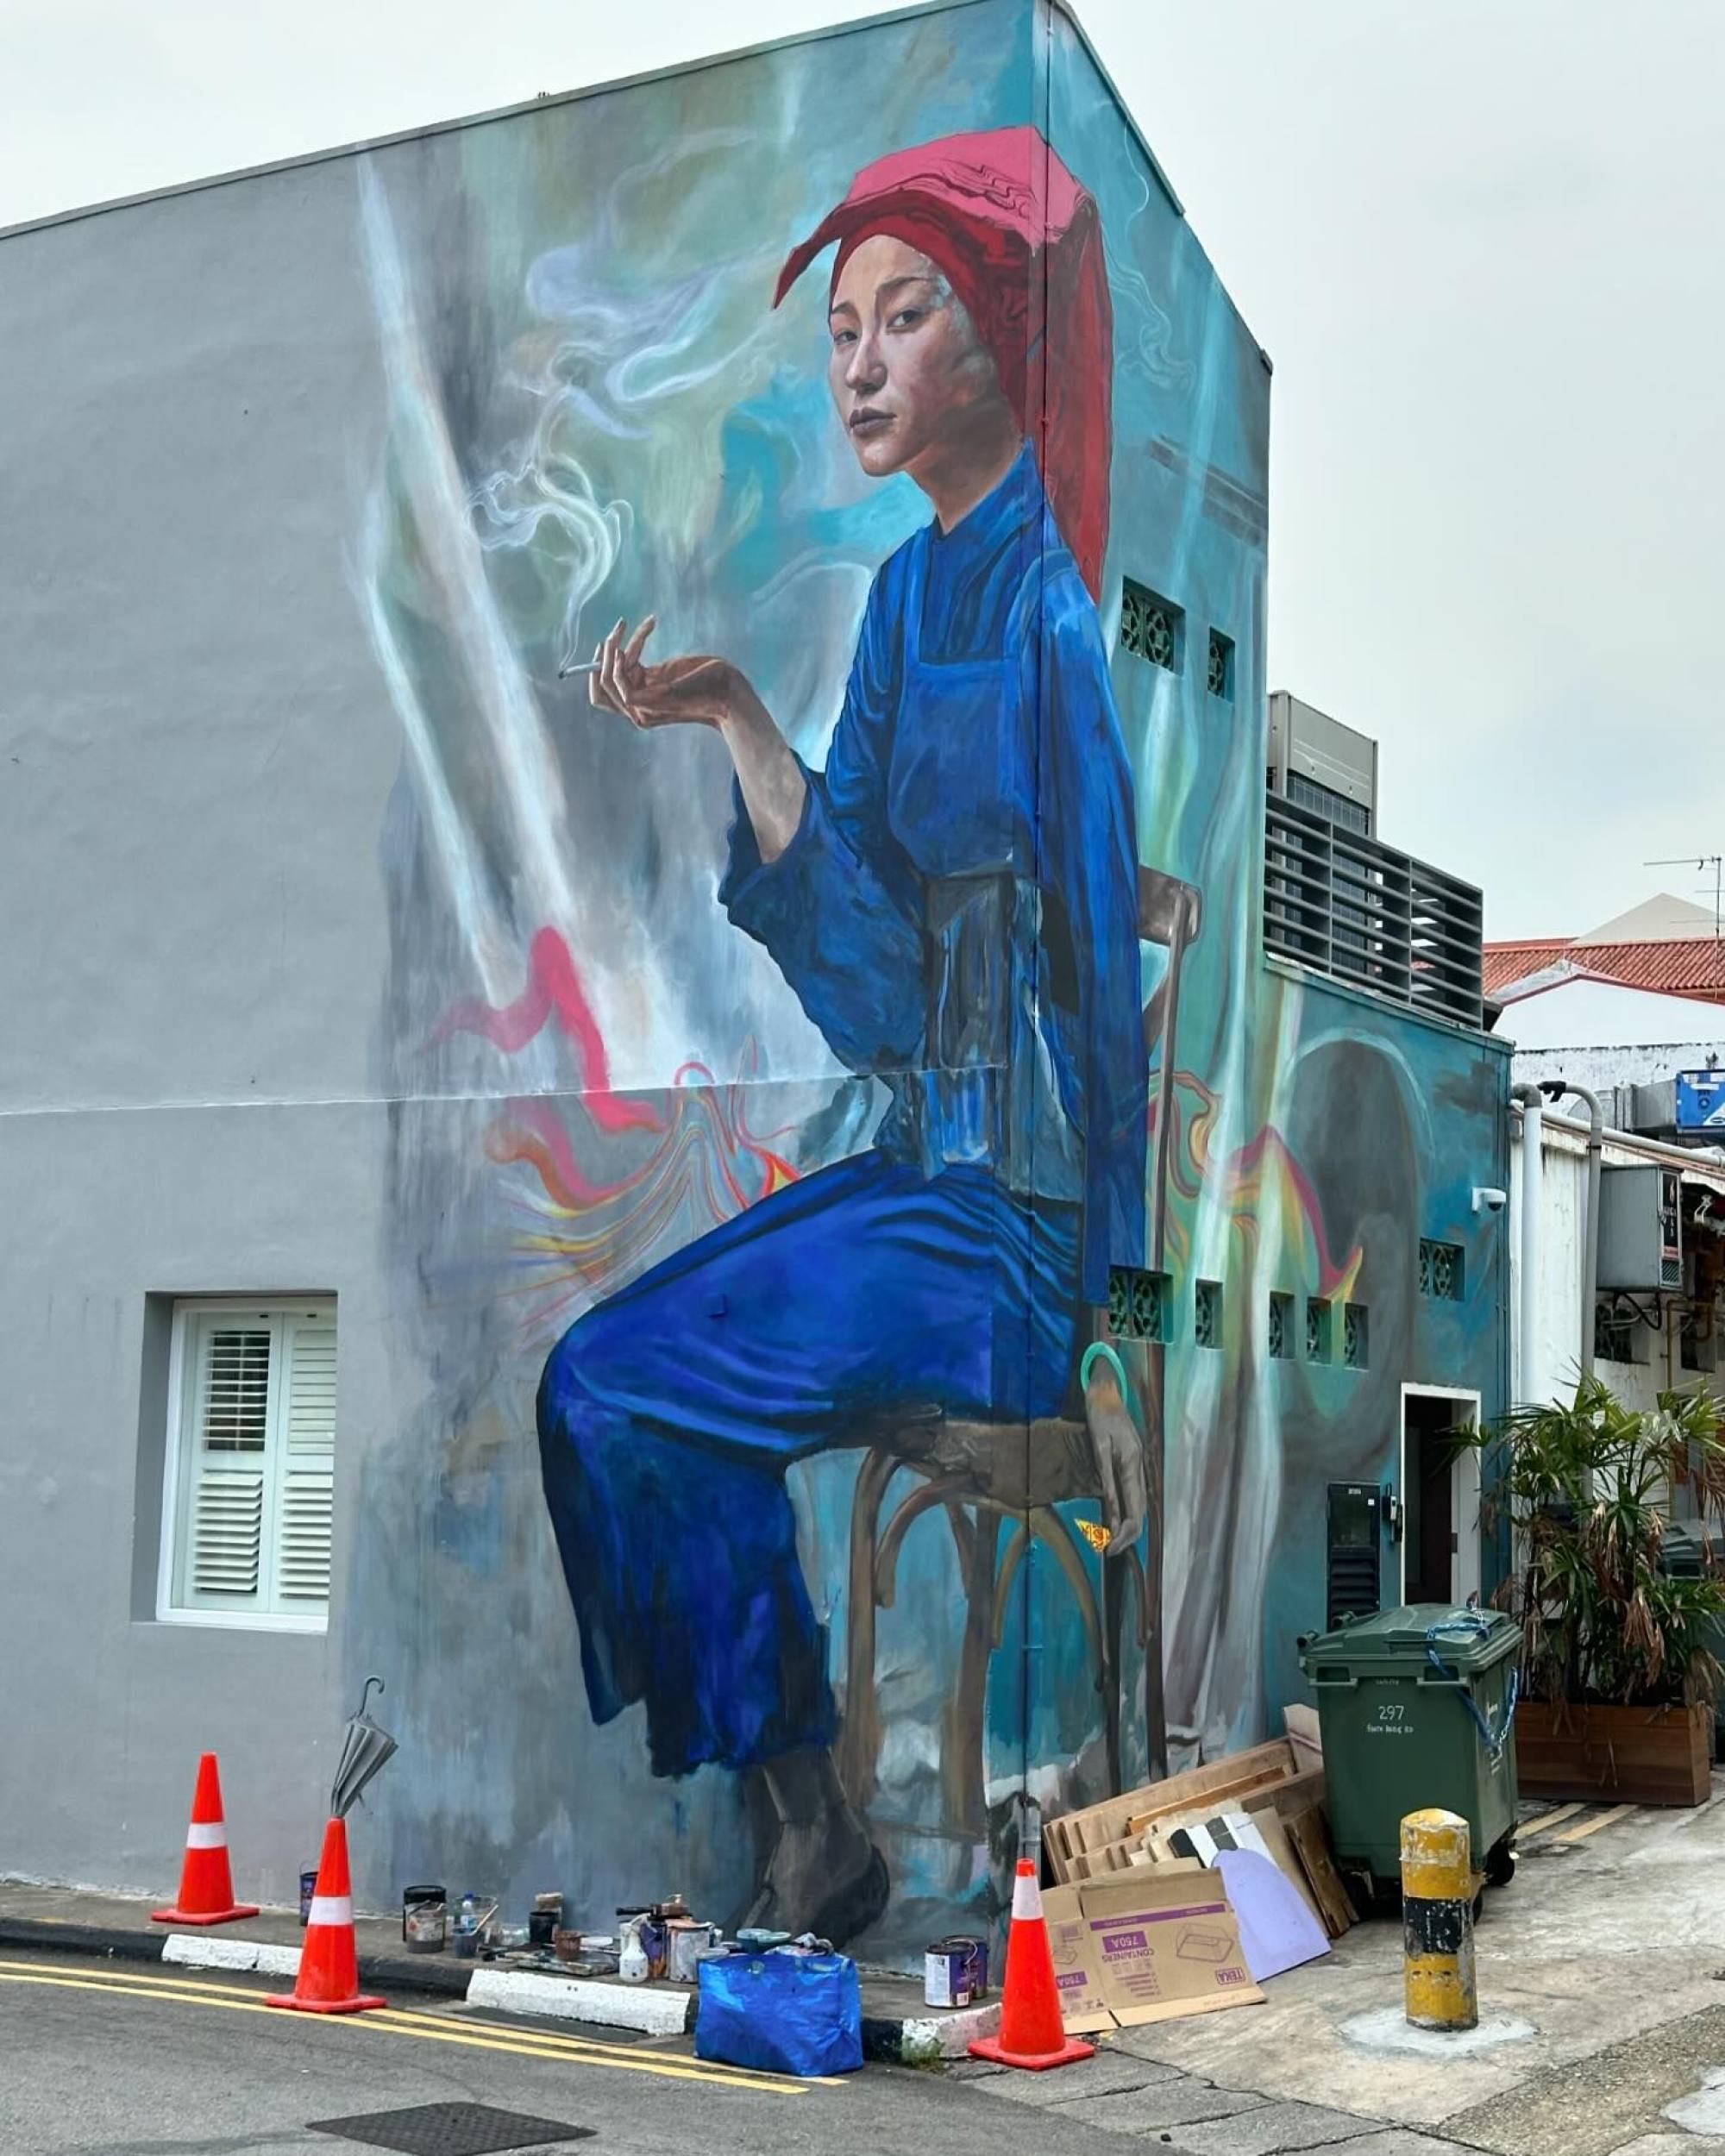 The mural depicts a young Samsui woman holding a smoking cigarette. Photo: Instagram/@seanpdunston